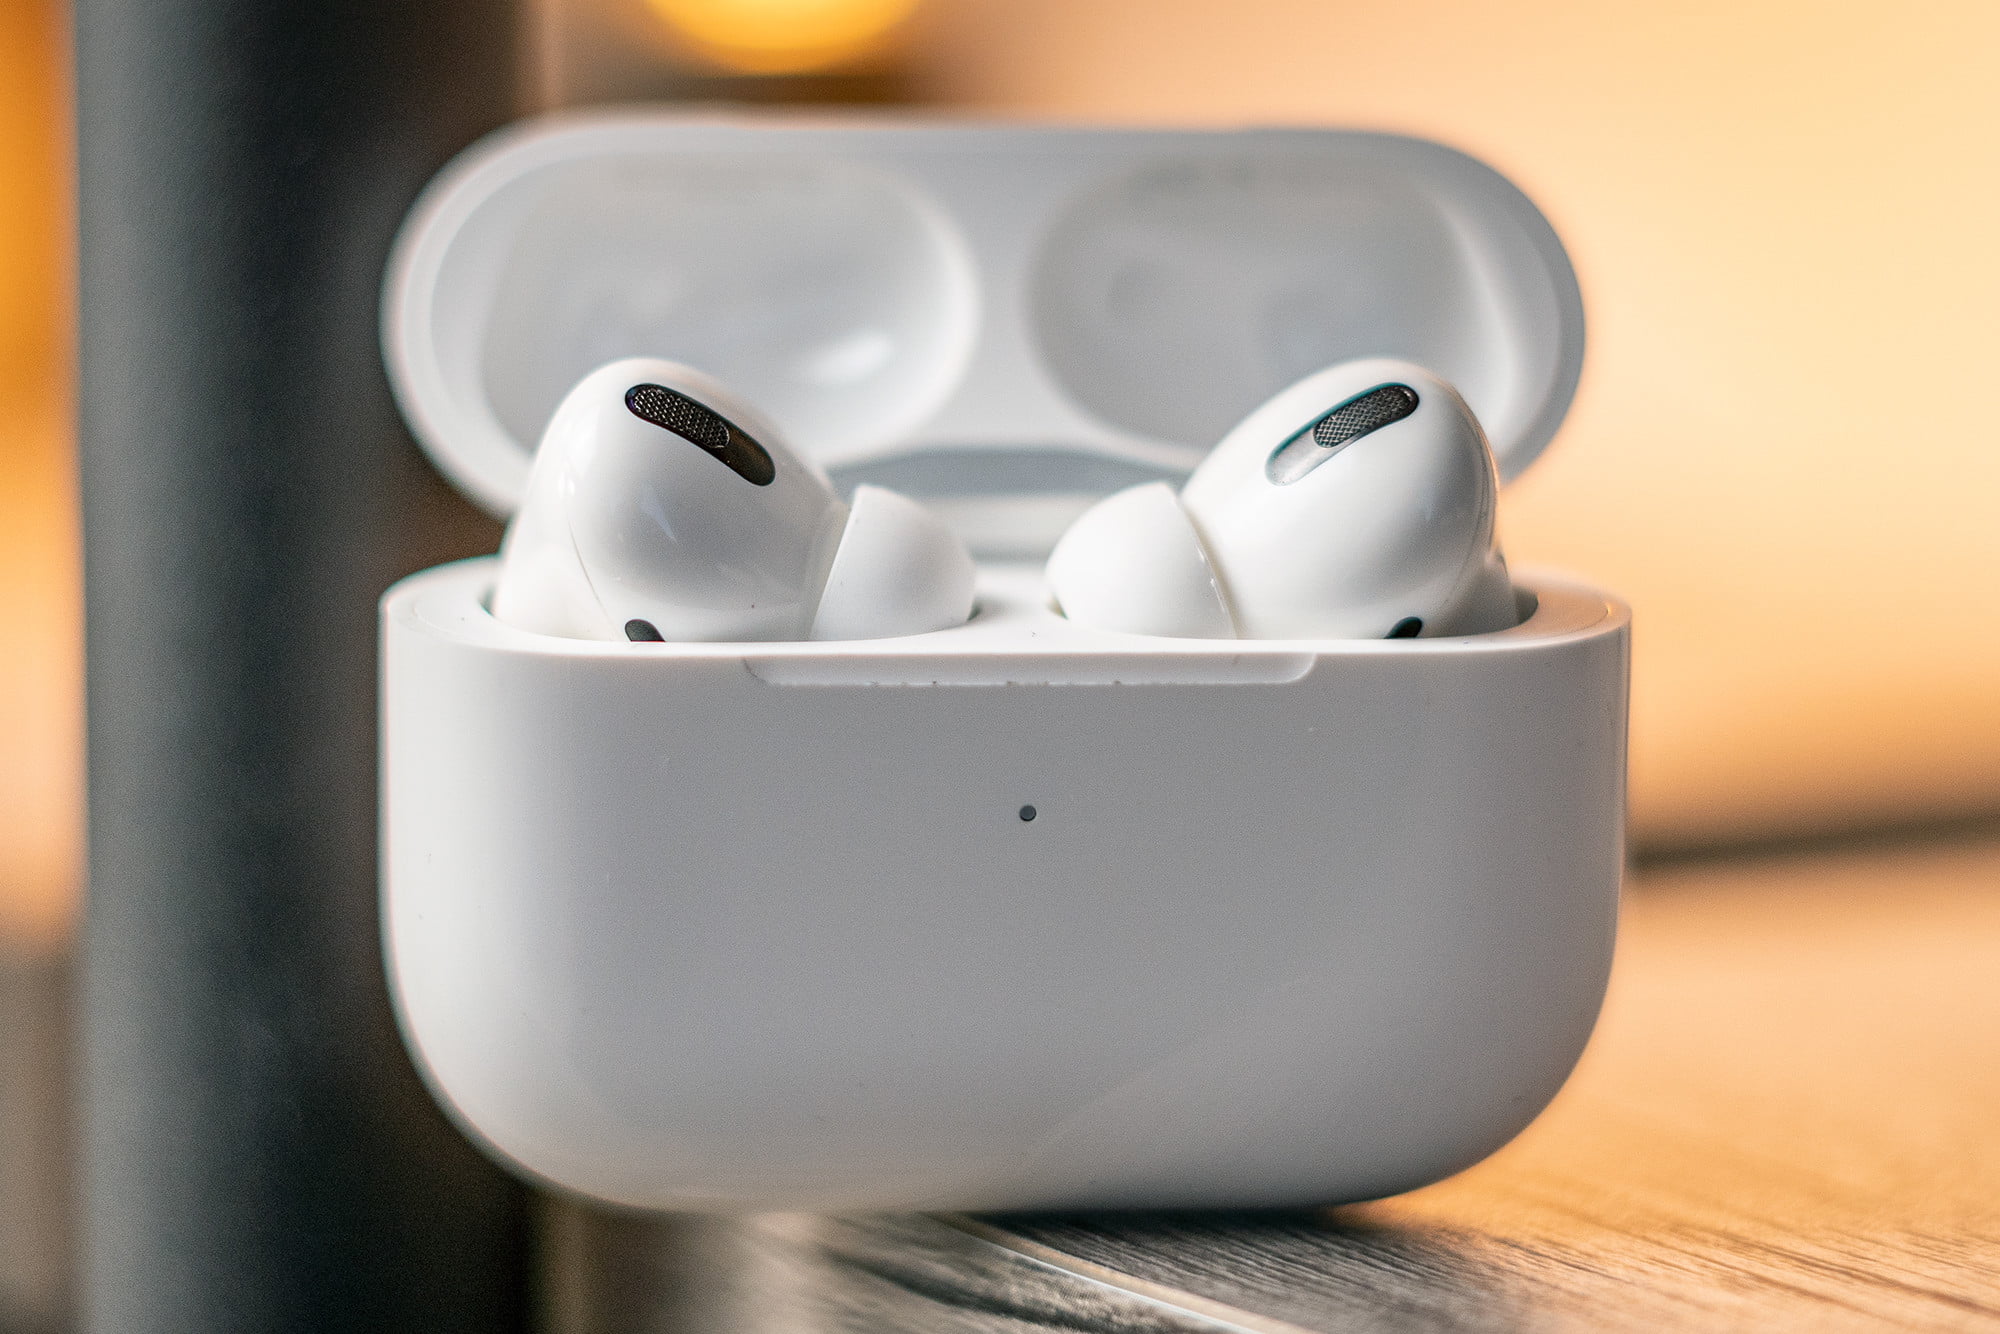 airpods pro2 (airpods没有充电仓怎么连接 airpods没有充电仓可以用吗)